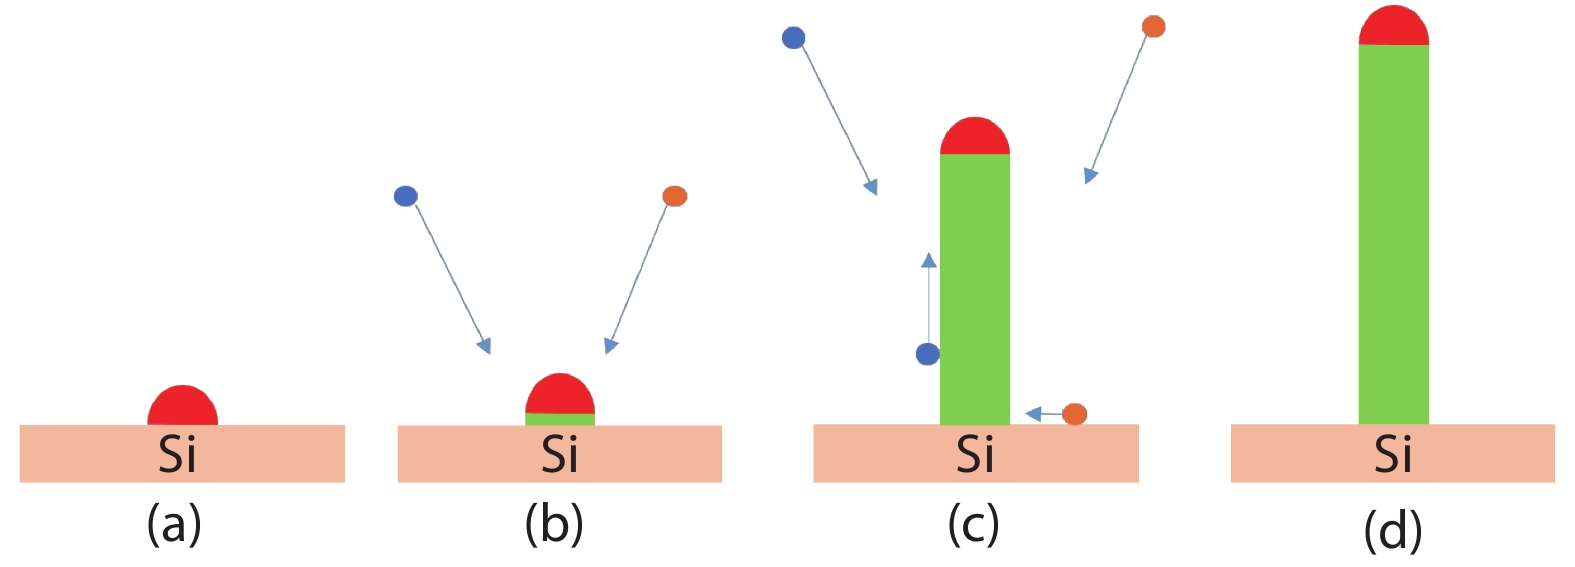 (Color online) (a) Droplet is deposited on the Si substrate. (b) Elements are supplied in the reactor. The adatoms are alloyed with the liquid droplet and, after supersaturation, a monolayer is formed covering the liquid/solid interface. (c) The continuous supply of elements leads to the elongation of the NW. The adatoms reach the droplet either via direct impingement or after diffusion on the substrate and the NW sidewalls. (d) After the supply of elements is terminated, the axial growth stops.